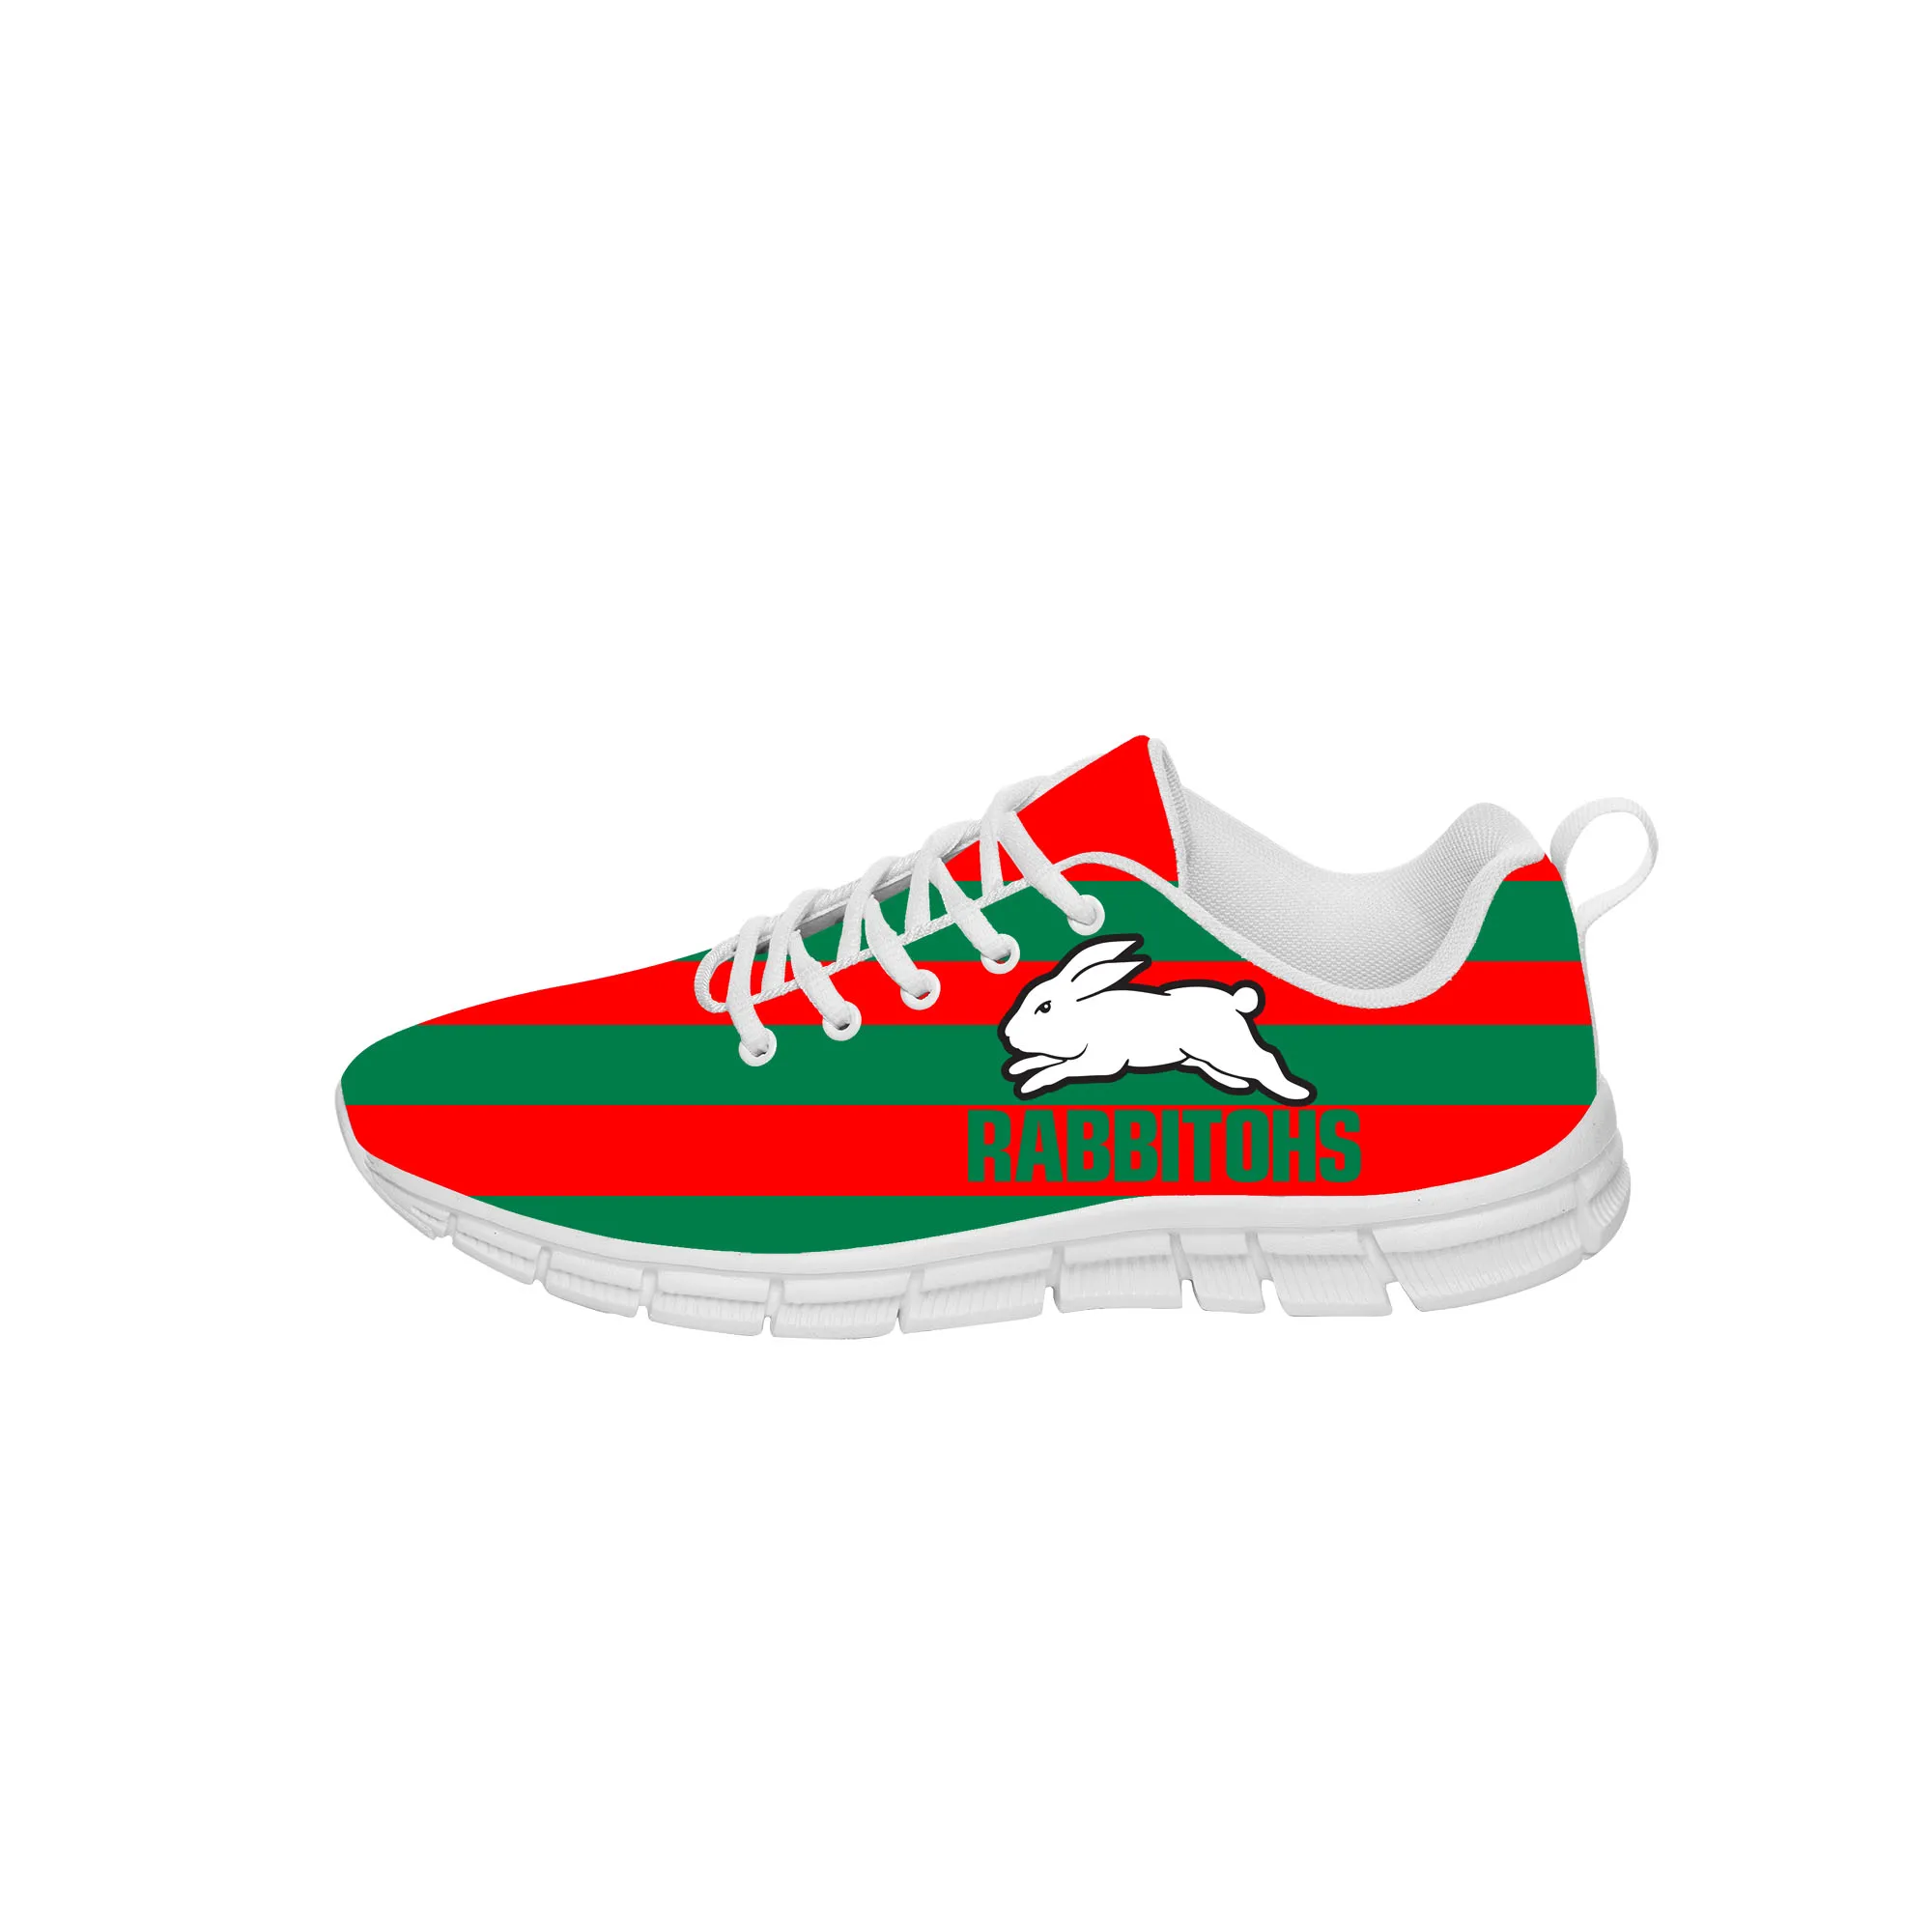 South Sydney Rabbitohs Sneakers Mens Womens Teenager Casual Shoes Canvas Cloth Shoes 3D Print Breathable Lightweight shoe anime my hero academia bakugou katsuki white sneakers mens womens teenager casual cloth shoes canvas 3d print lightweight shoe